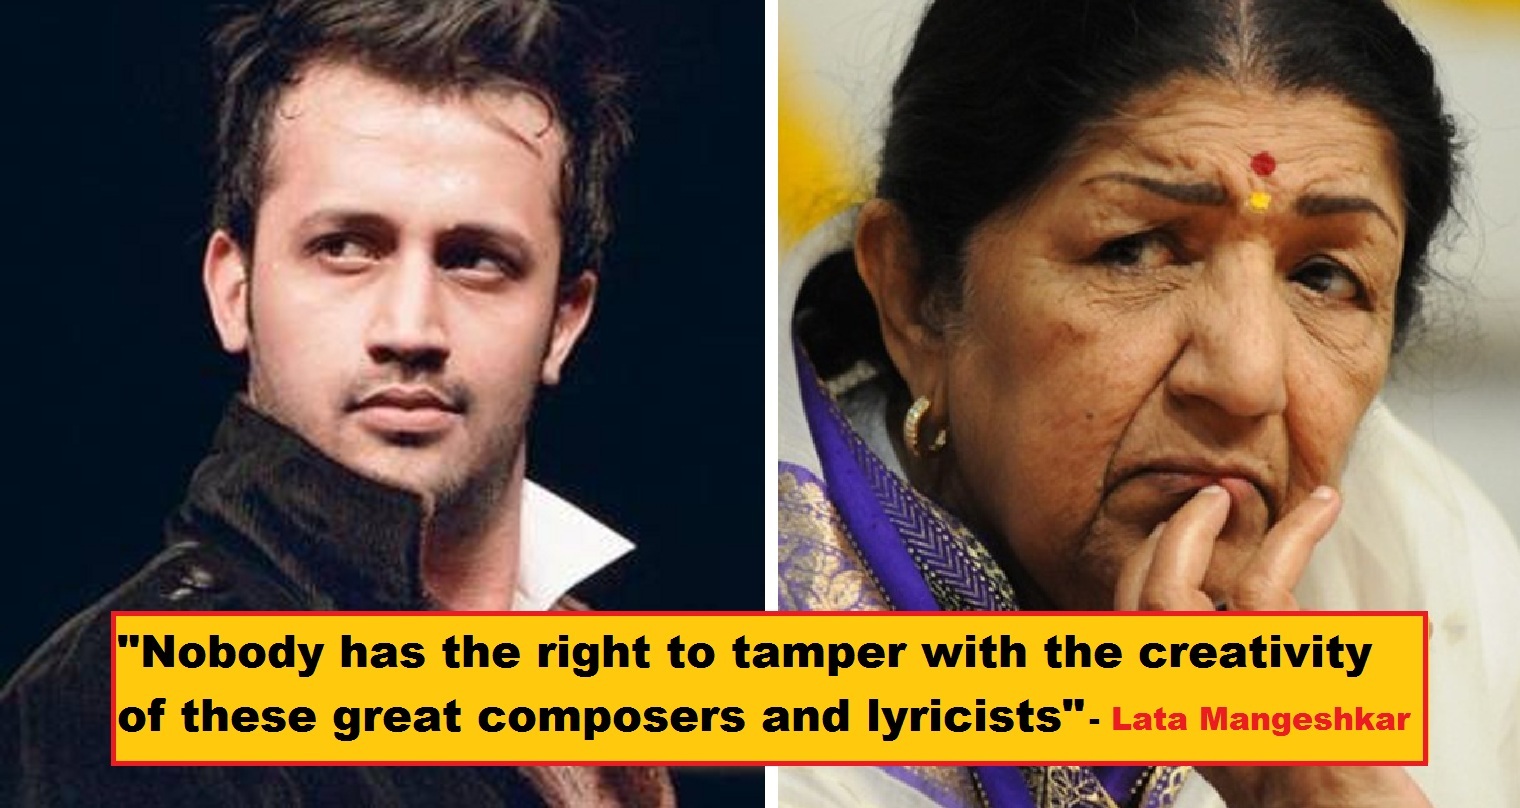 Lata Mangeshkar Angry Over Atif Aslam Covering Her Classic, ‘Chalte Chalte’